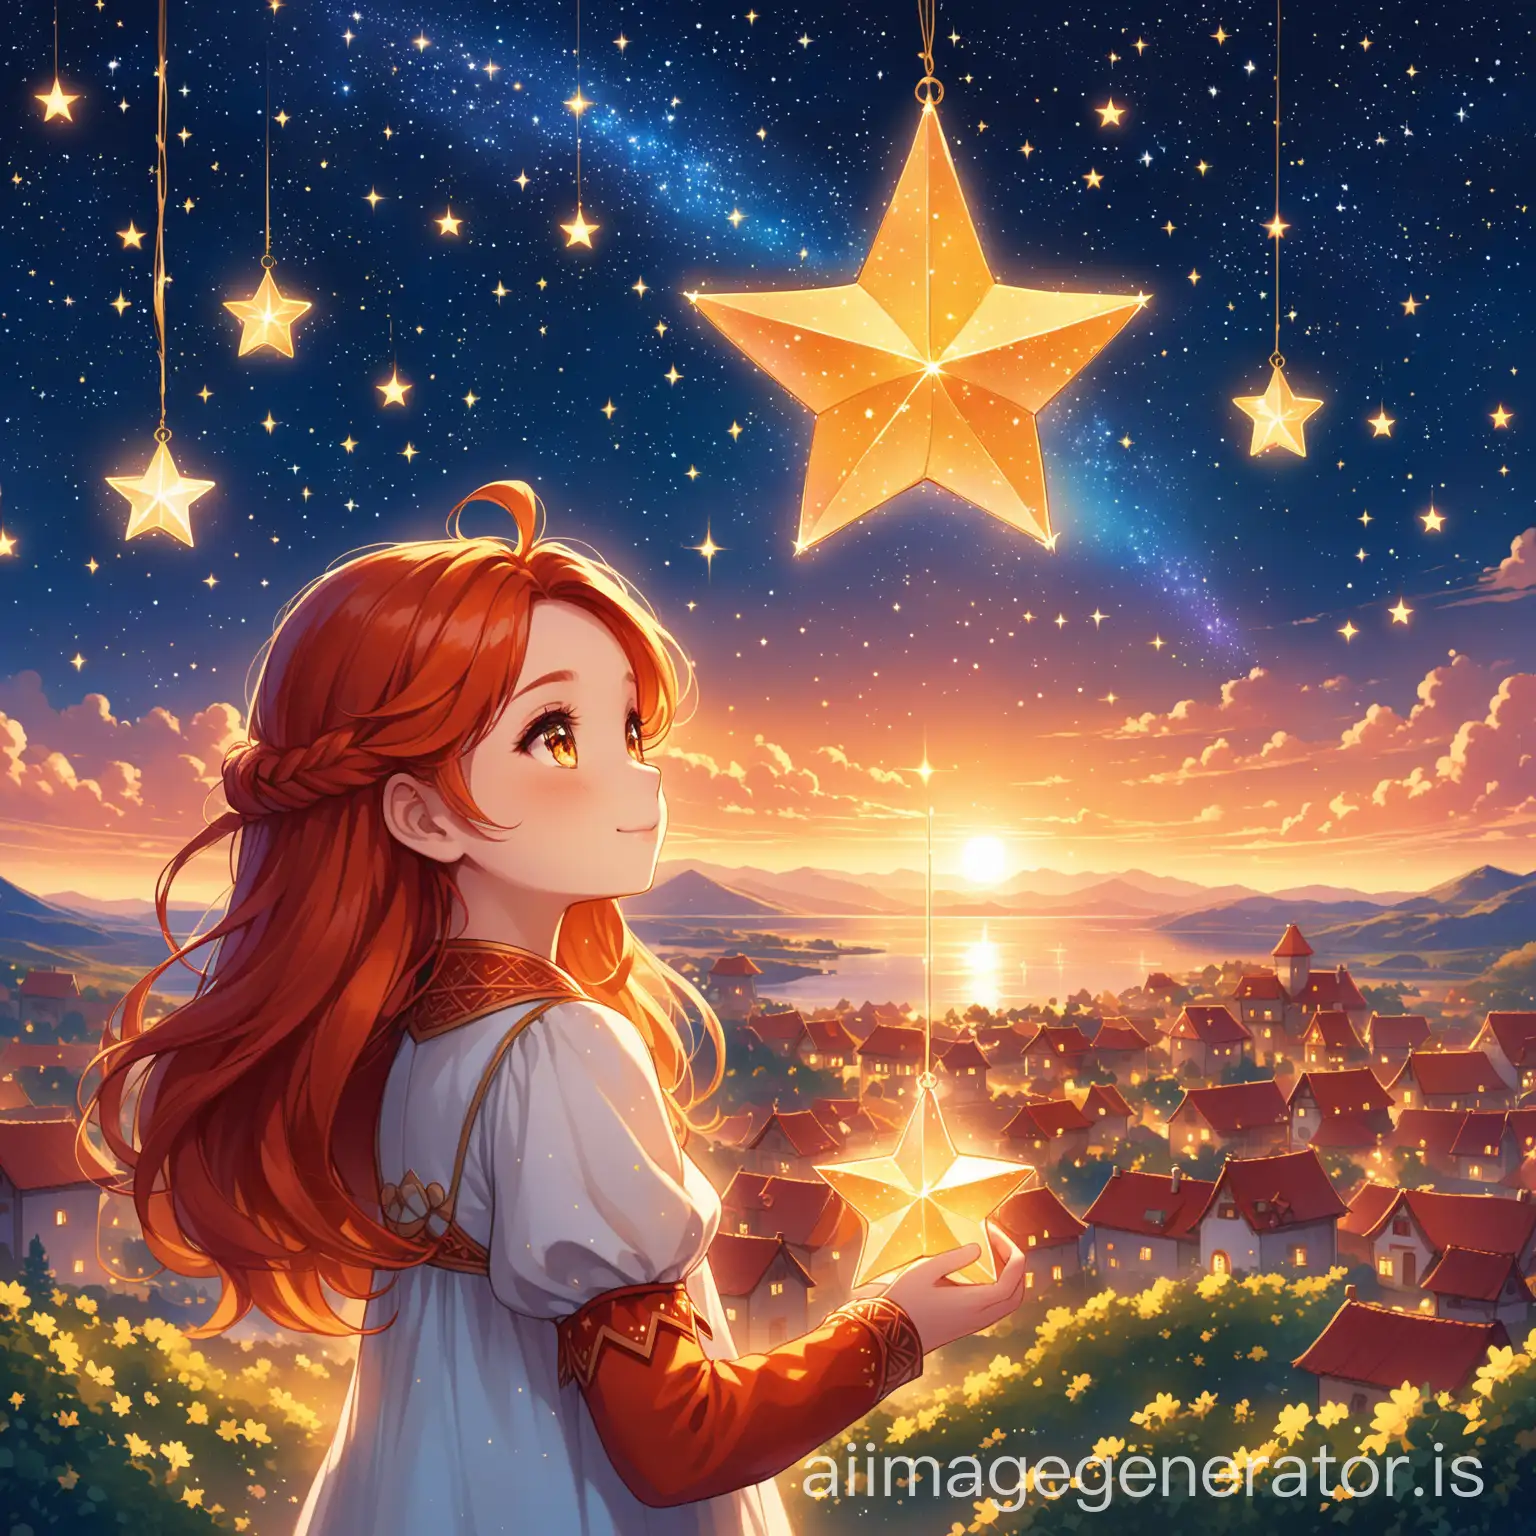 There was a girl in a small village named Lina. Lina was a lovable and imaginative girl. She always dreamed of the stars and distant places. One of her biggest wishes was to have her own star.